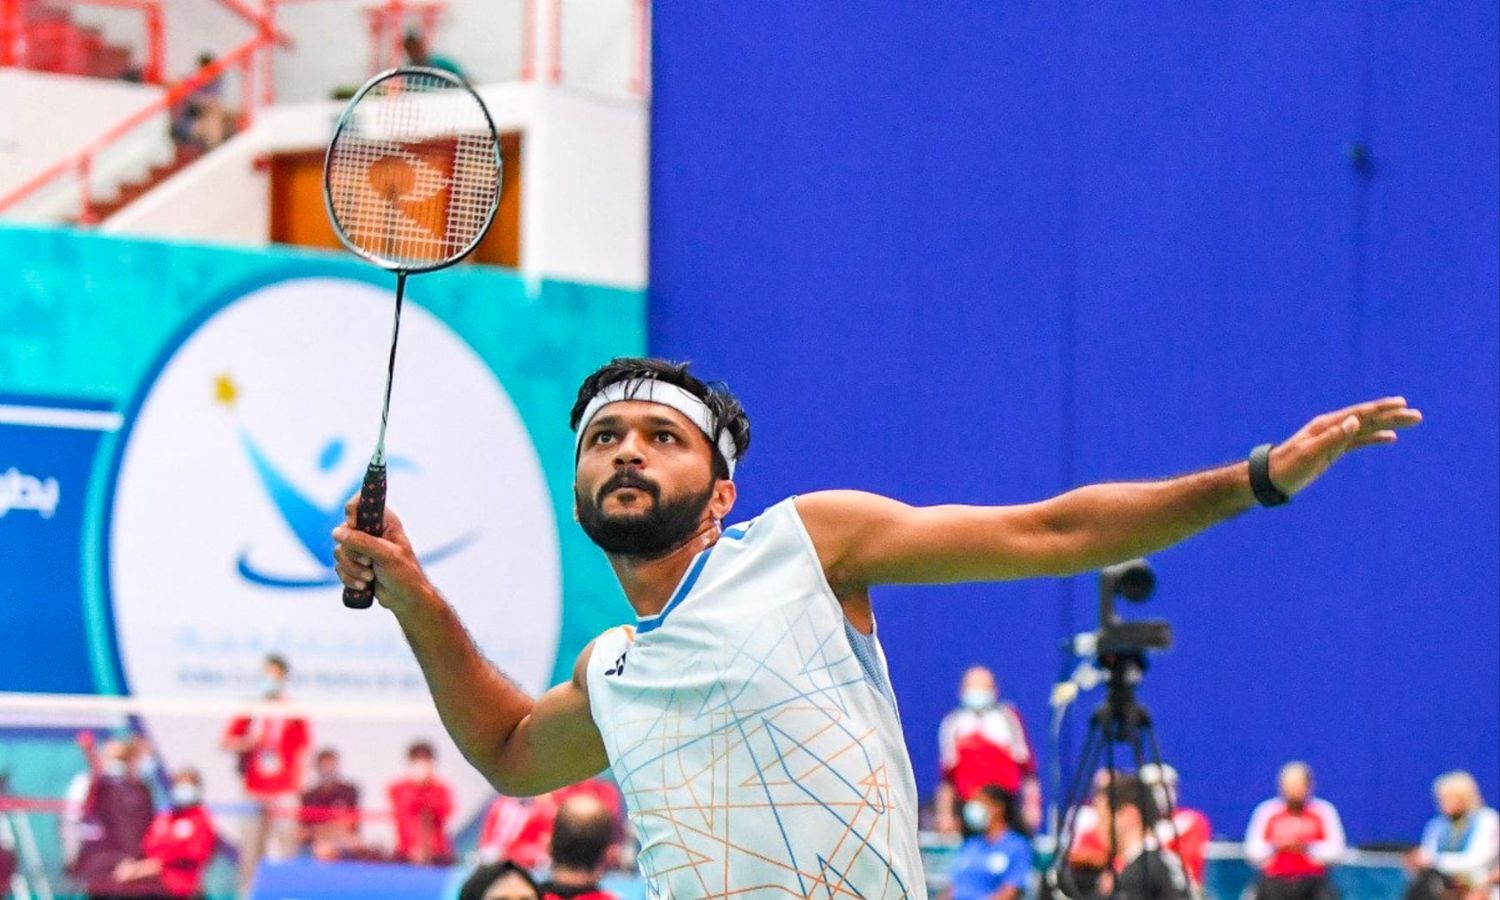 You are currently viewing ‘Athleisure clothes help me stay connected,’ says para-badminton star Sukant Kadam